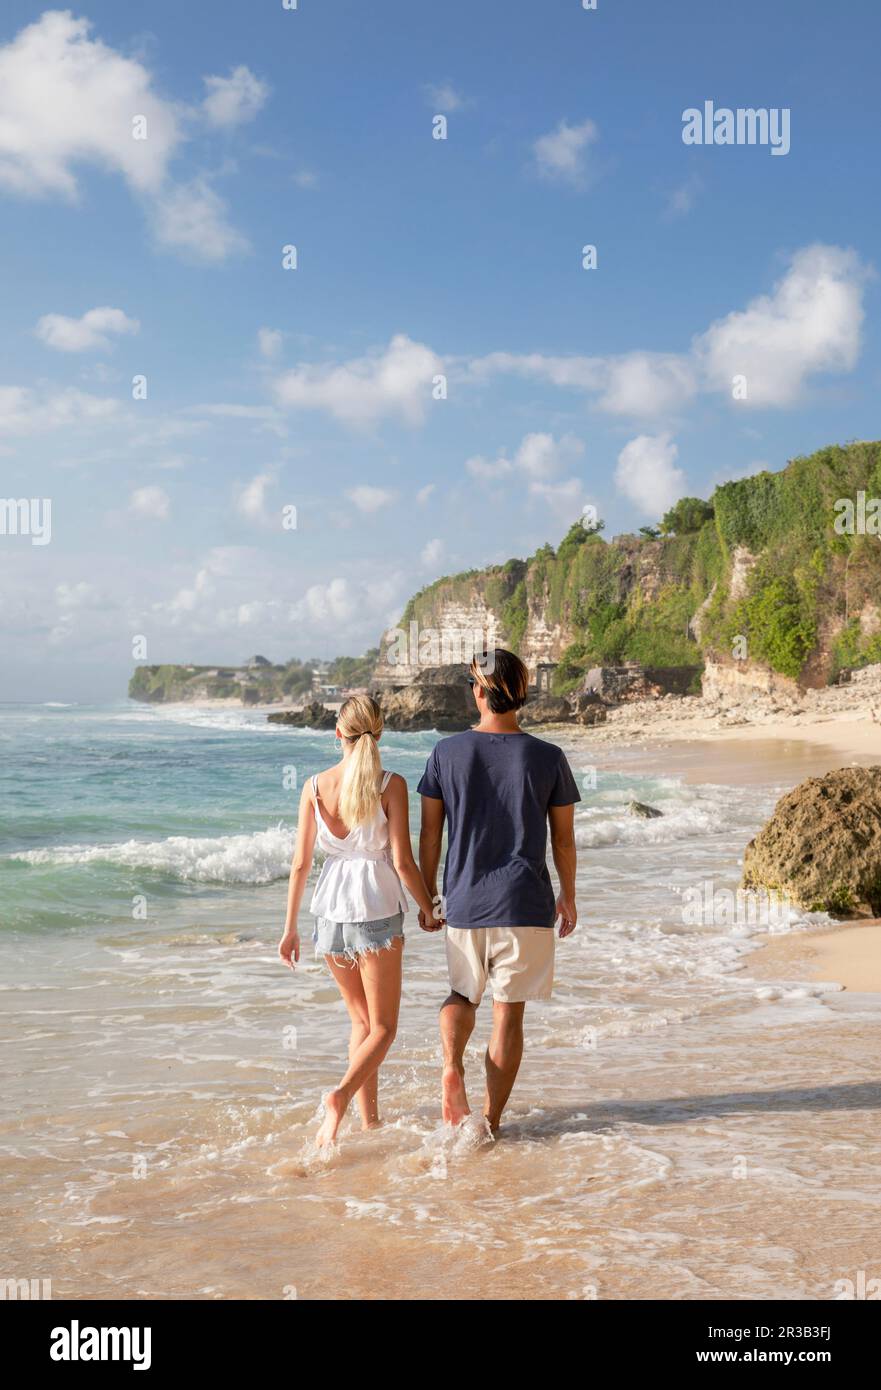 Couple holding hands and walking at beach Stock Photo